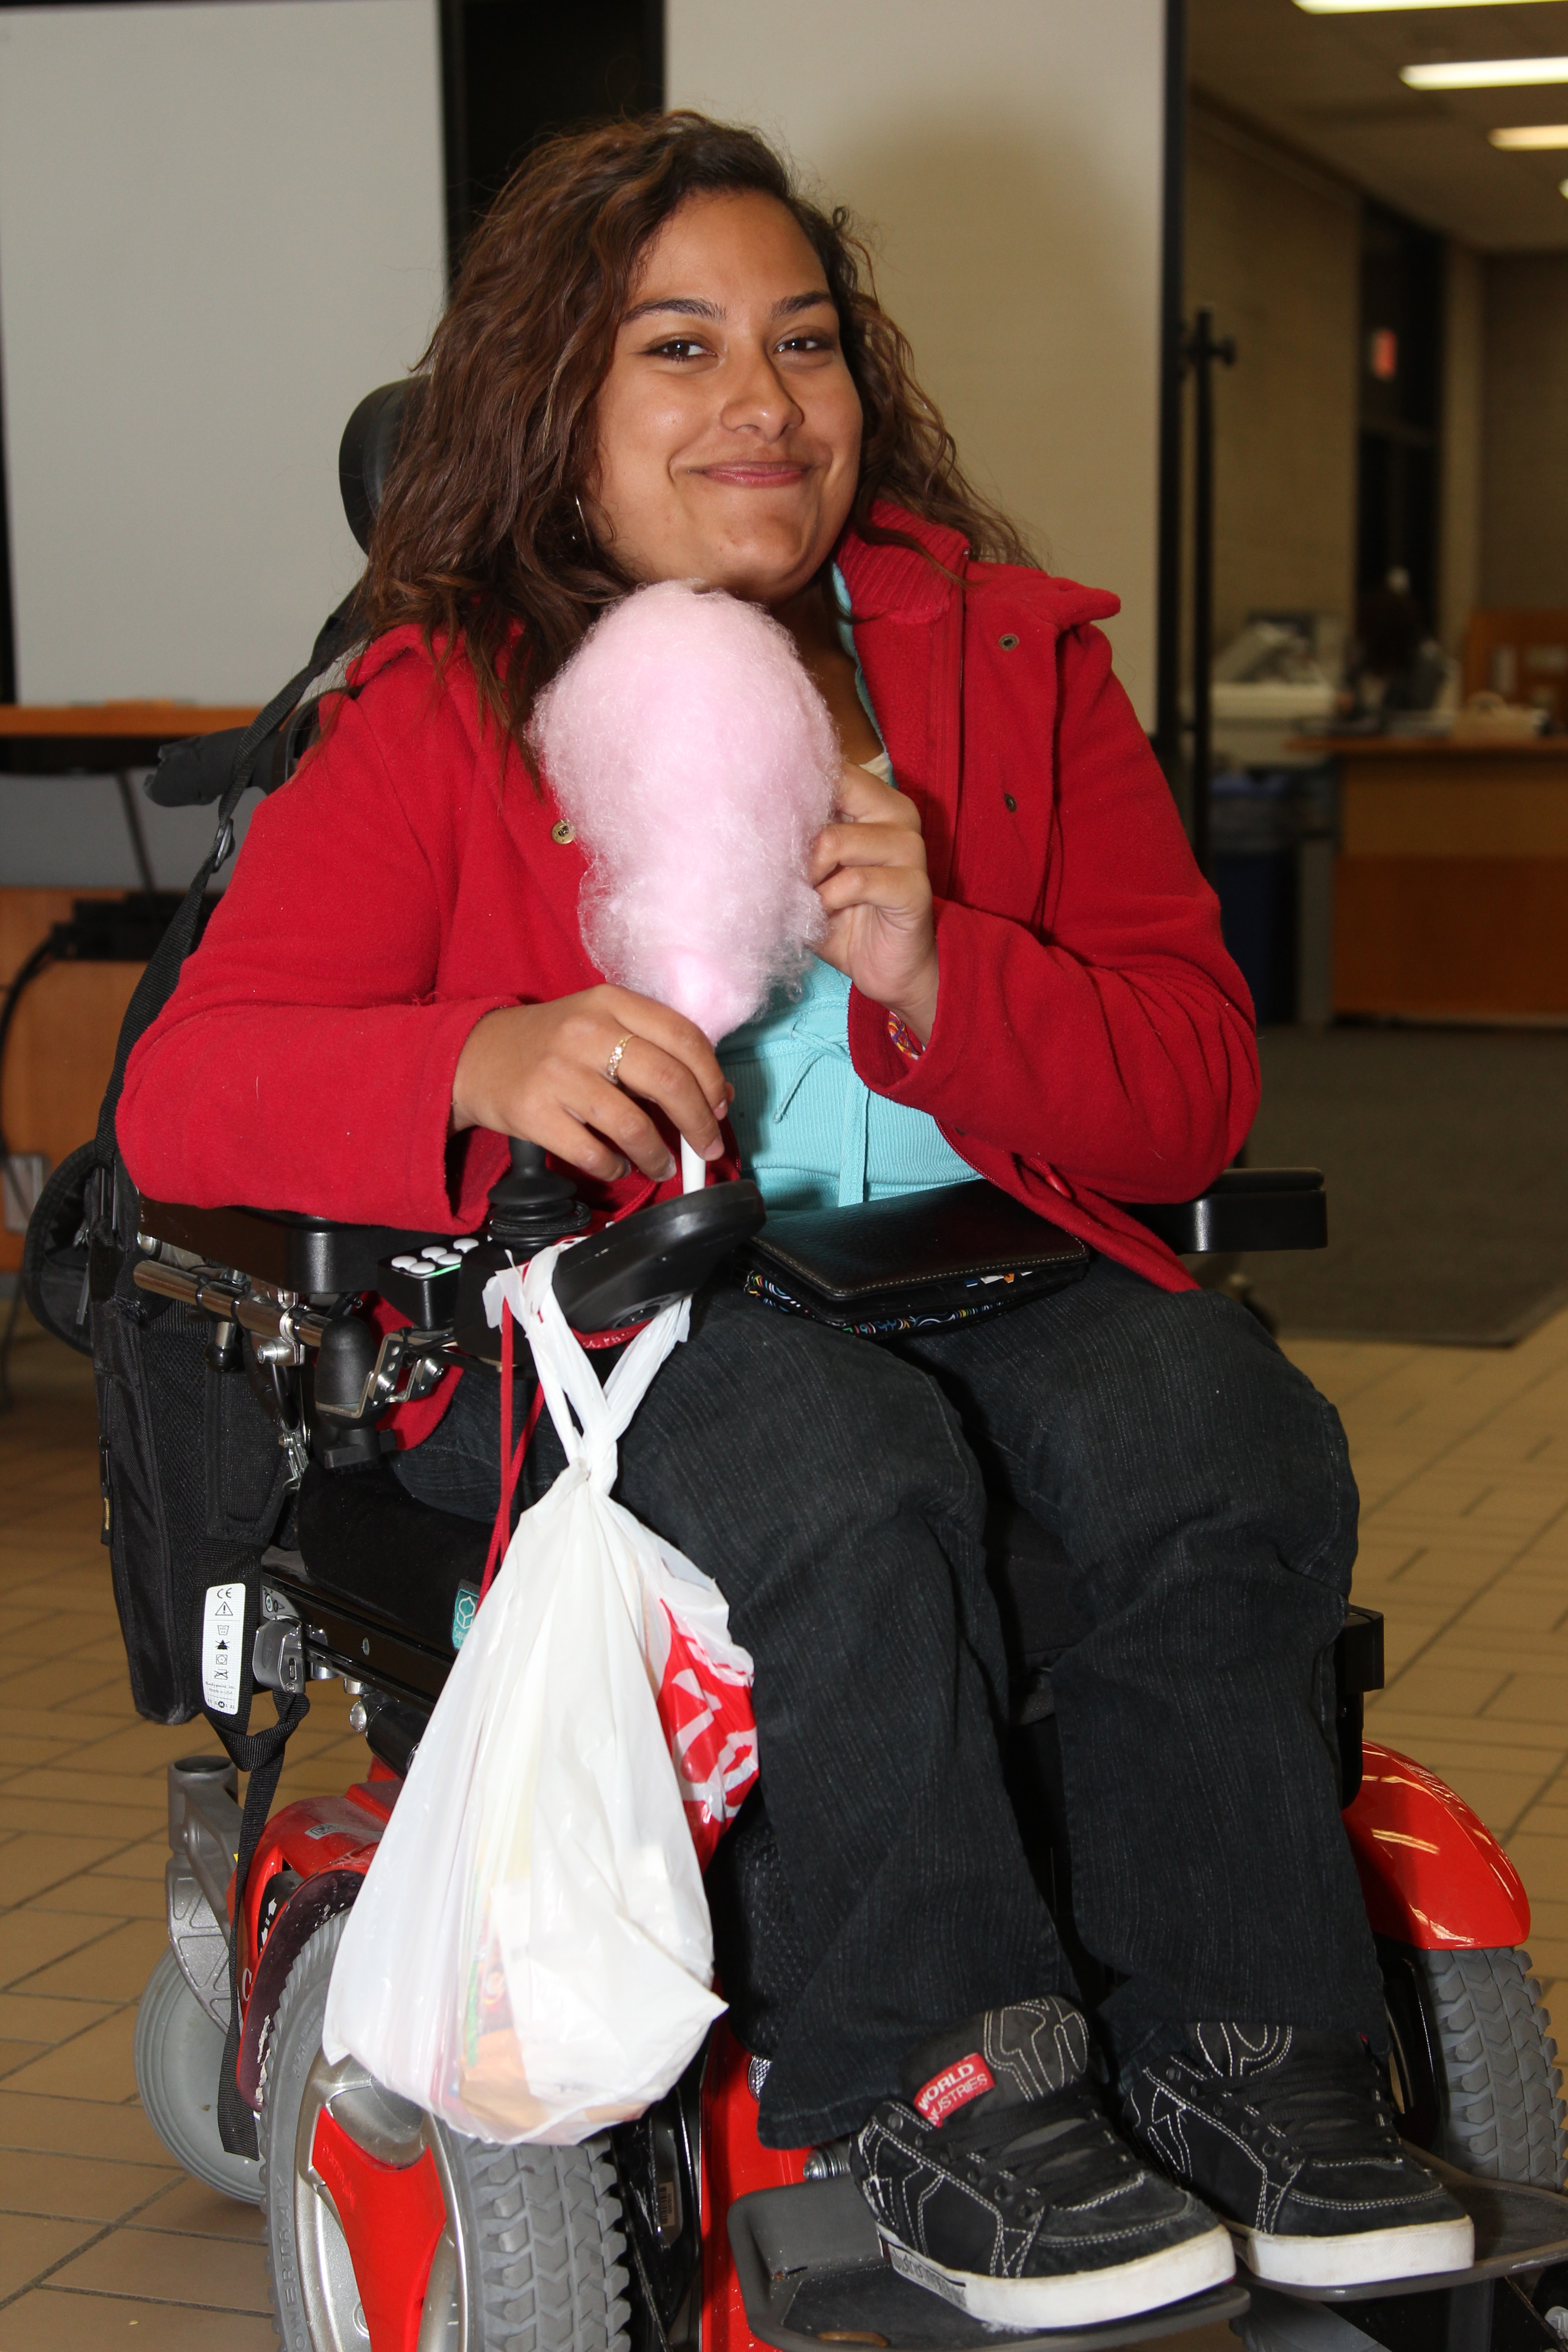 An individual on wheelchair holding cotton candy